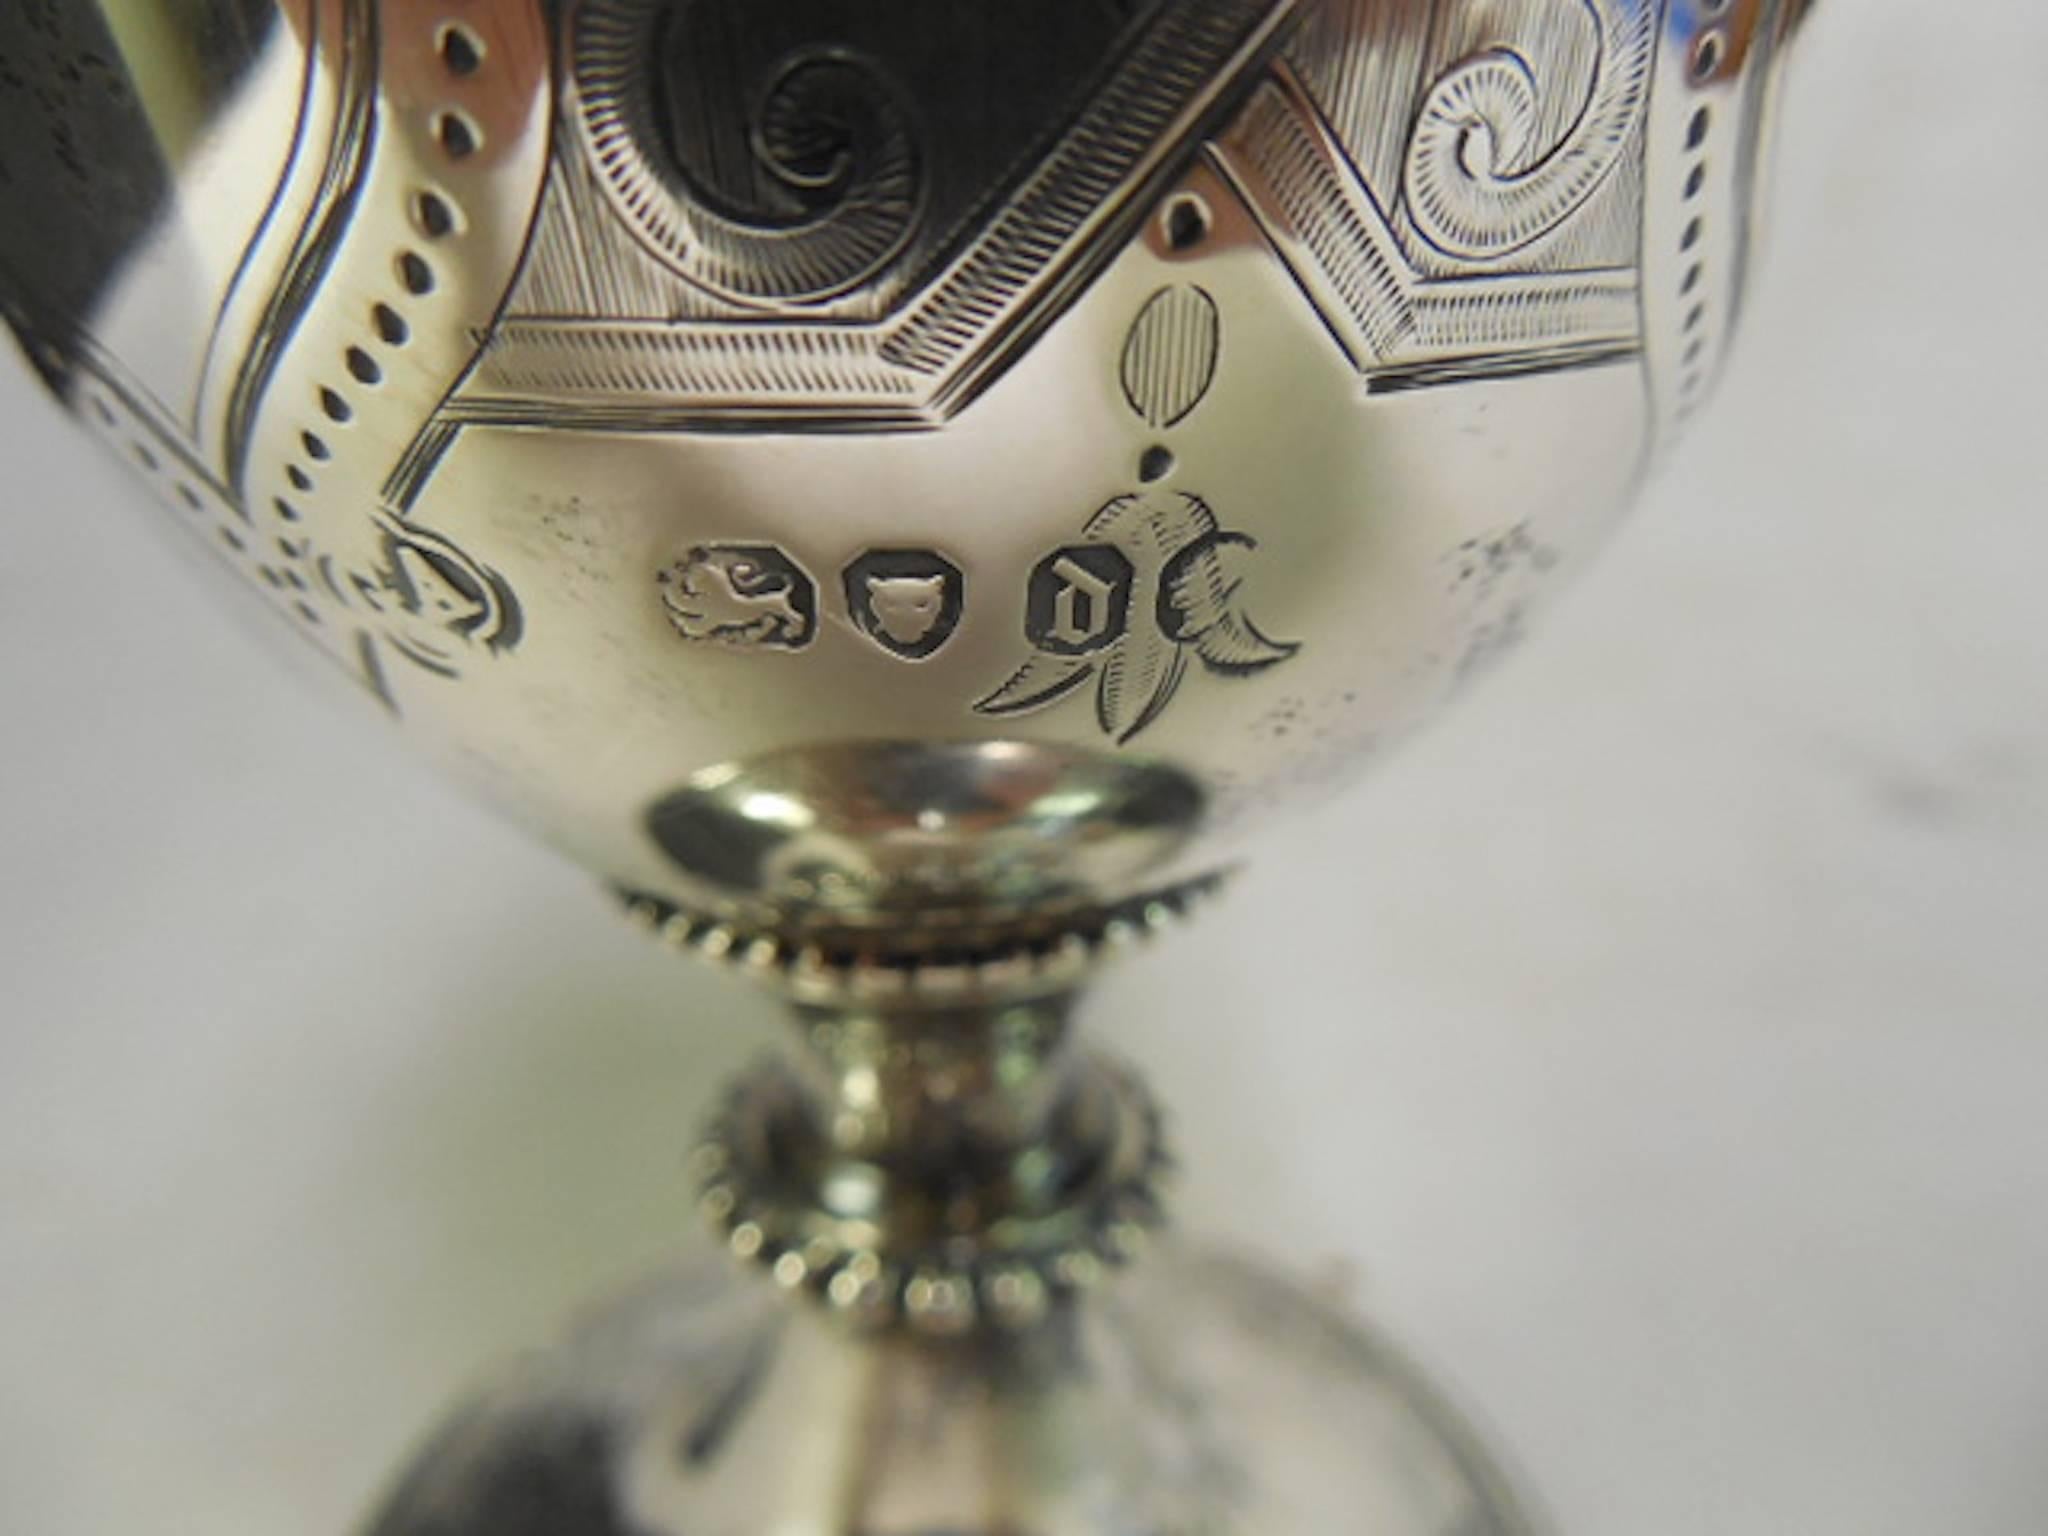 Etched George Angell, London, 1859 Sterling Goblet